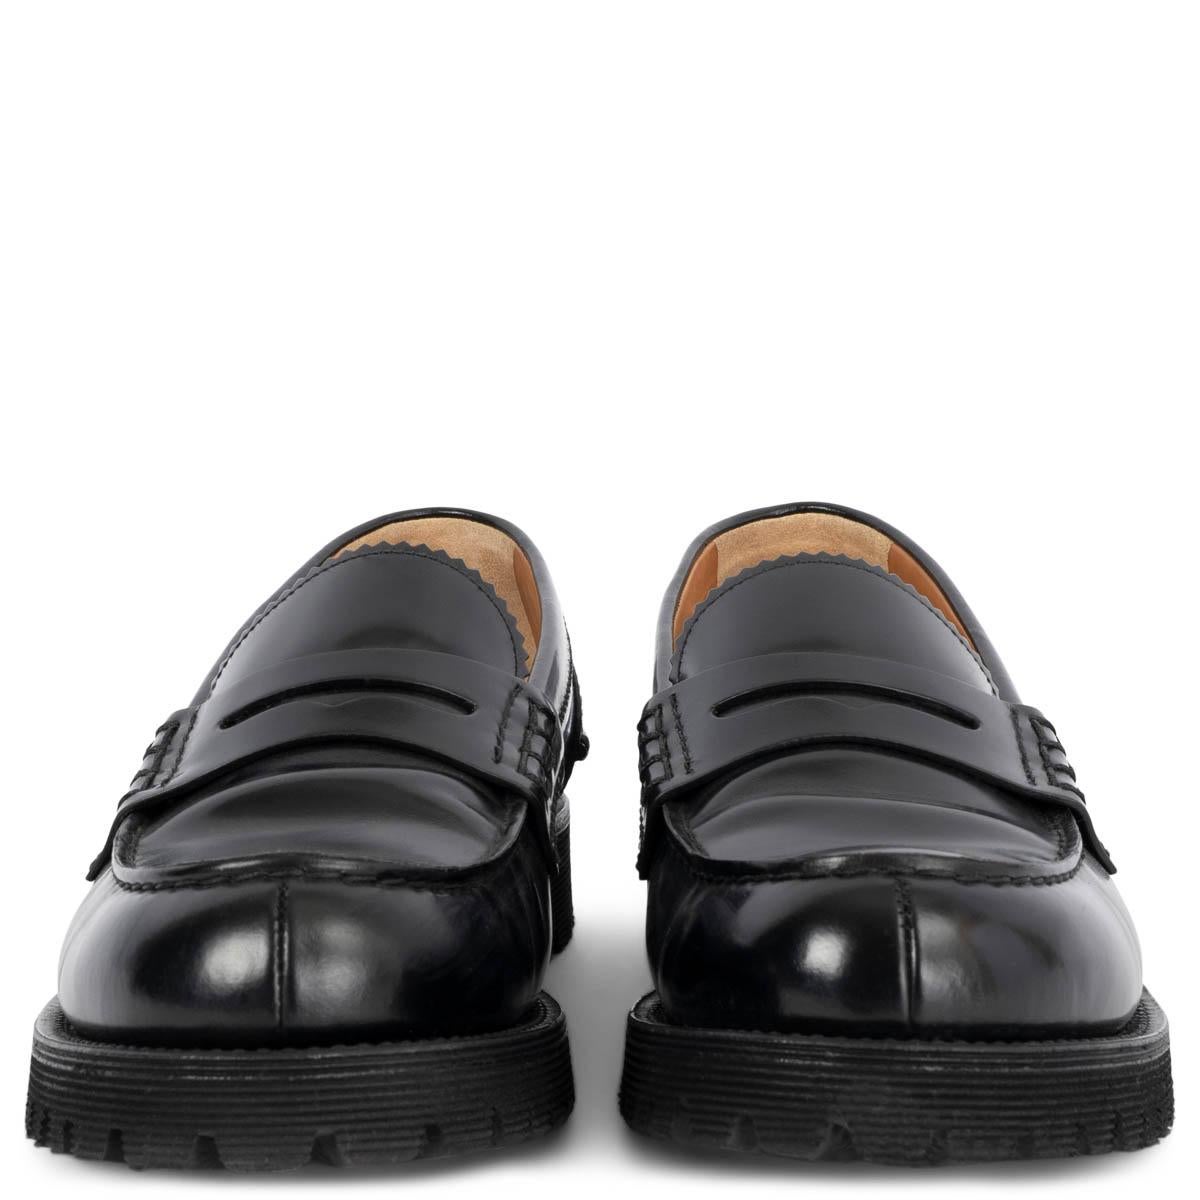 100% authentic Church's classic penny loafers in black smooth shiny calfskin with a chunky black rubber sole. Have been worn and are in excellent condition. 

Measurements
Imprinted Size	39.5
Shoe Size	39.5
Inside Sole	26.5cm (10.3in)
Width	7.5cm